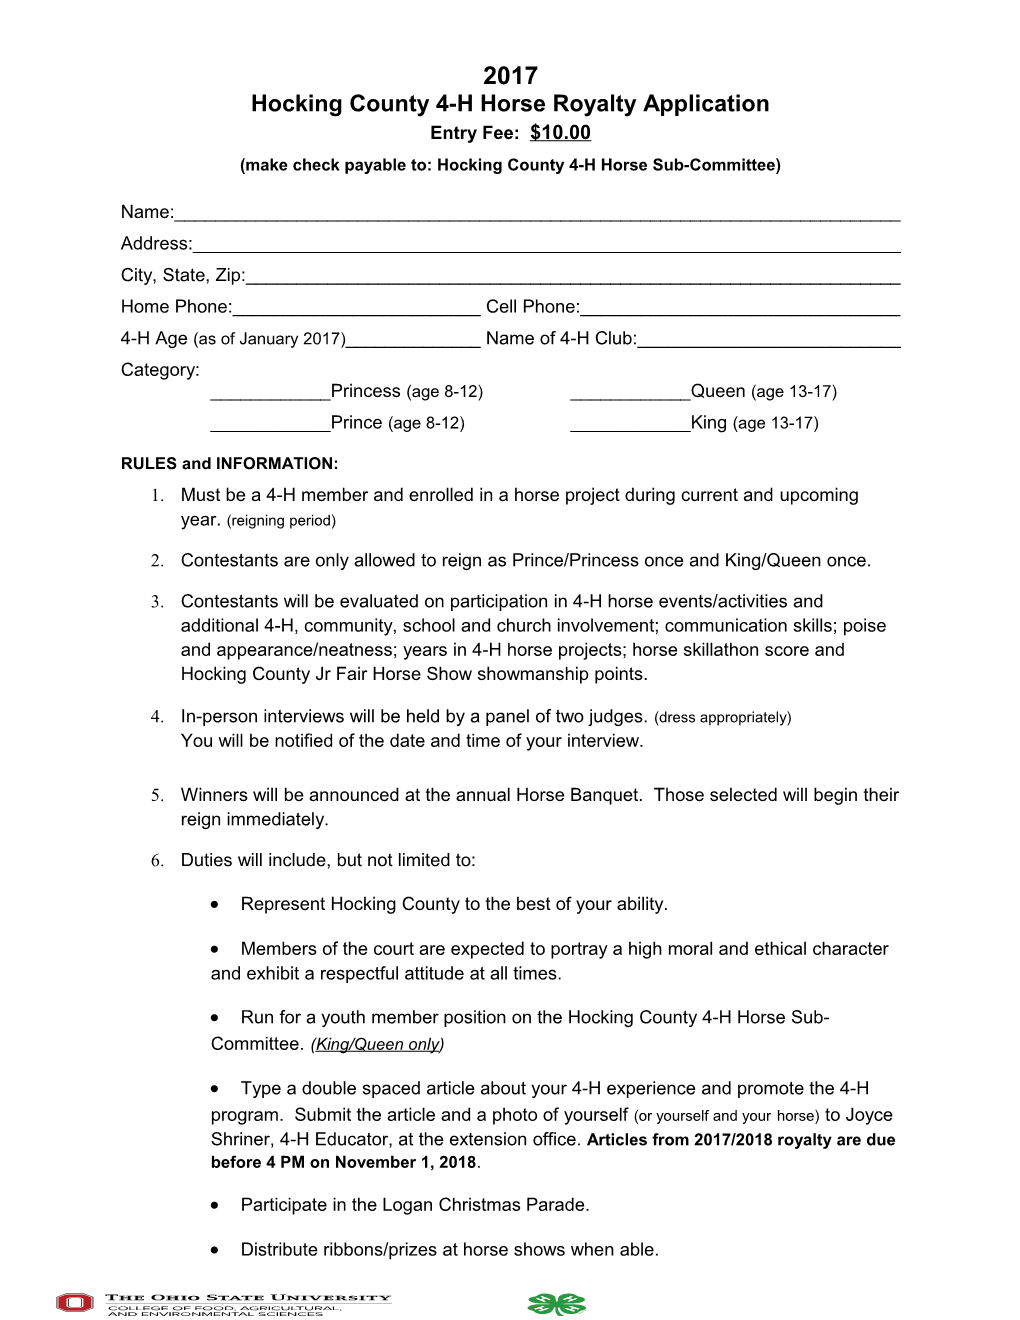 Hocking County 4-H Horse Royalty Application